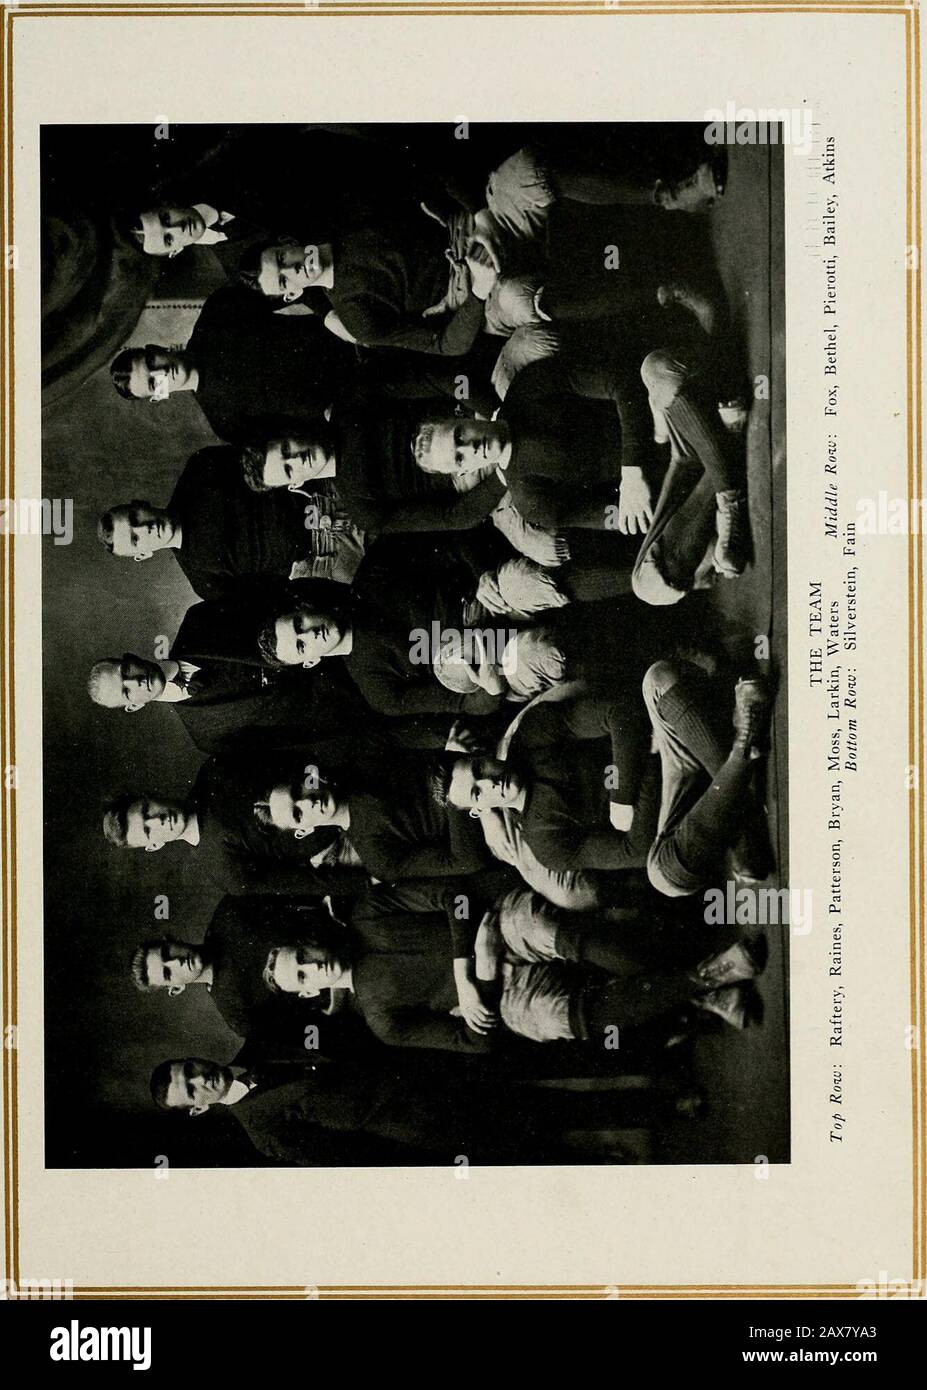 Calyx . Page One hundred seventeen Squad A. F. Pierotti Captain J. B. Waters Manager S. M. Dickson Assistant Manager J. A. Witt . Assistant Manager W. C. Battery (W. & L.) Coach B. D. Bryan (W. & L.) VARSITY Assistant Coach Pierotti Patterson, C. H. Fox Silver-stein Larkin Scovell Baines Gilliam Watts Fain Atkins Bailey Bethel BlainSUBSTITUTES Moss, C. W. Gregg Spencer Hartley Wadsworth Smith, W. E. Bolston Henderson Wilson Patterson, J. Jones, M. C. Taylor Sloan Le Fils Montgomery Henry Corbett Taylor Young » Page One hundred eighteen. Page One hundred nineteen r Stock Photo